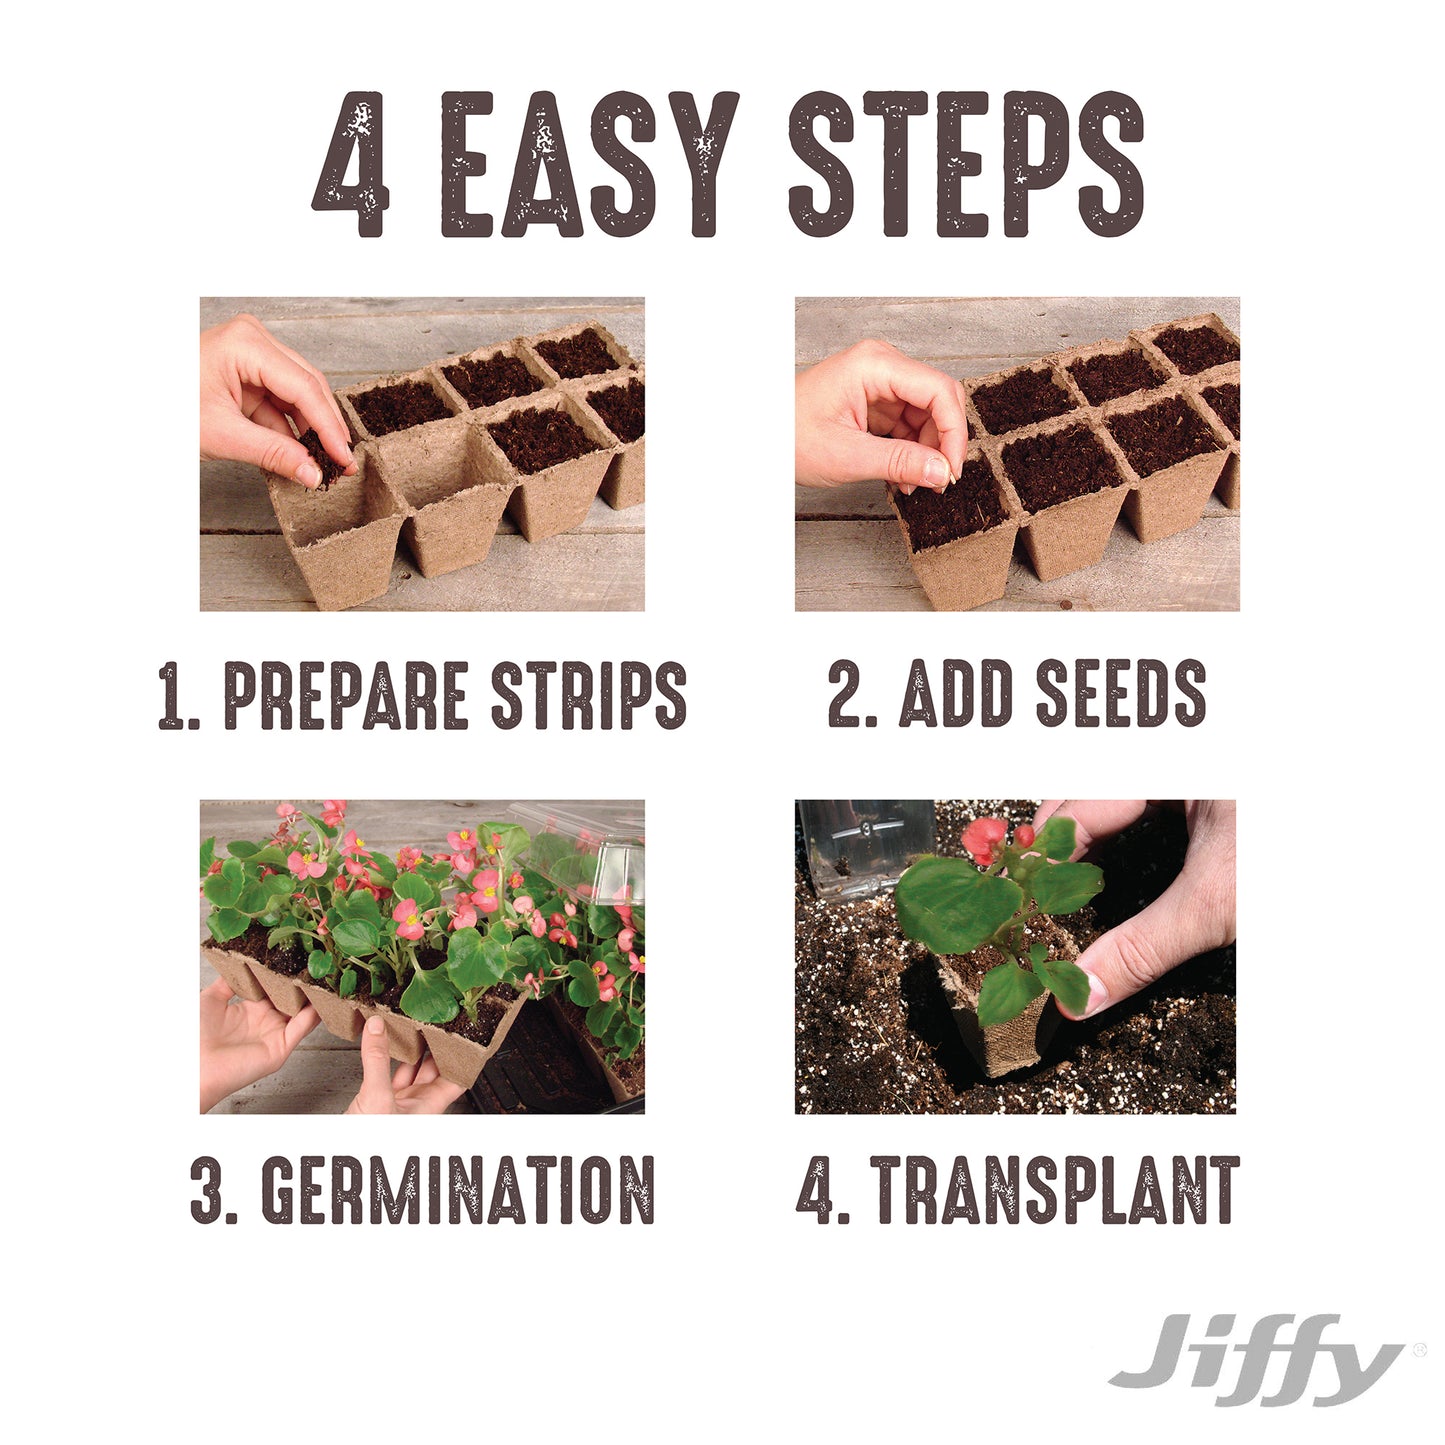 Jiffy Biodegradable 32 Cell Peat Strip Seed Starting Greenhouse with SUPERthrive